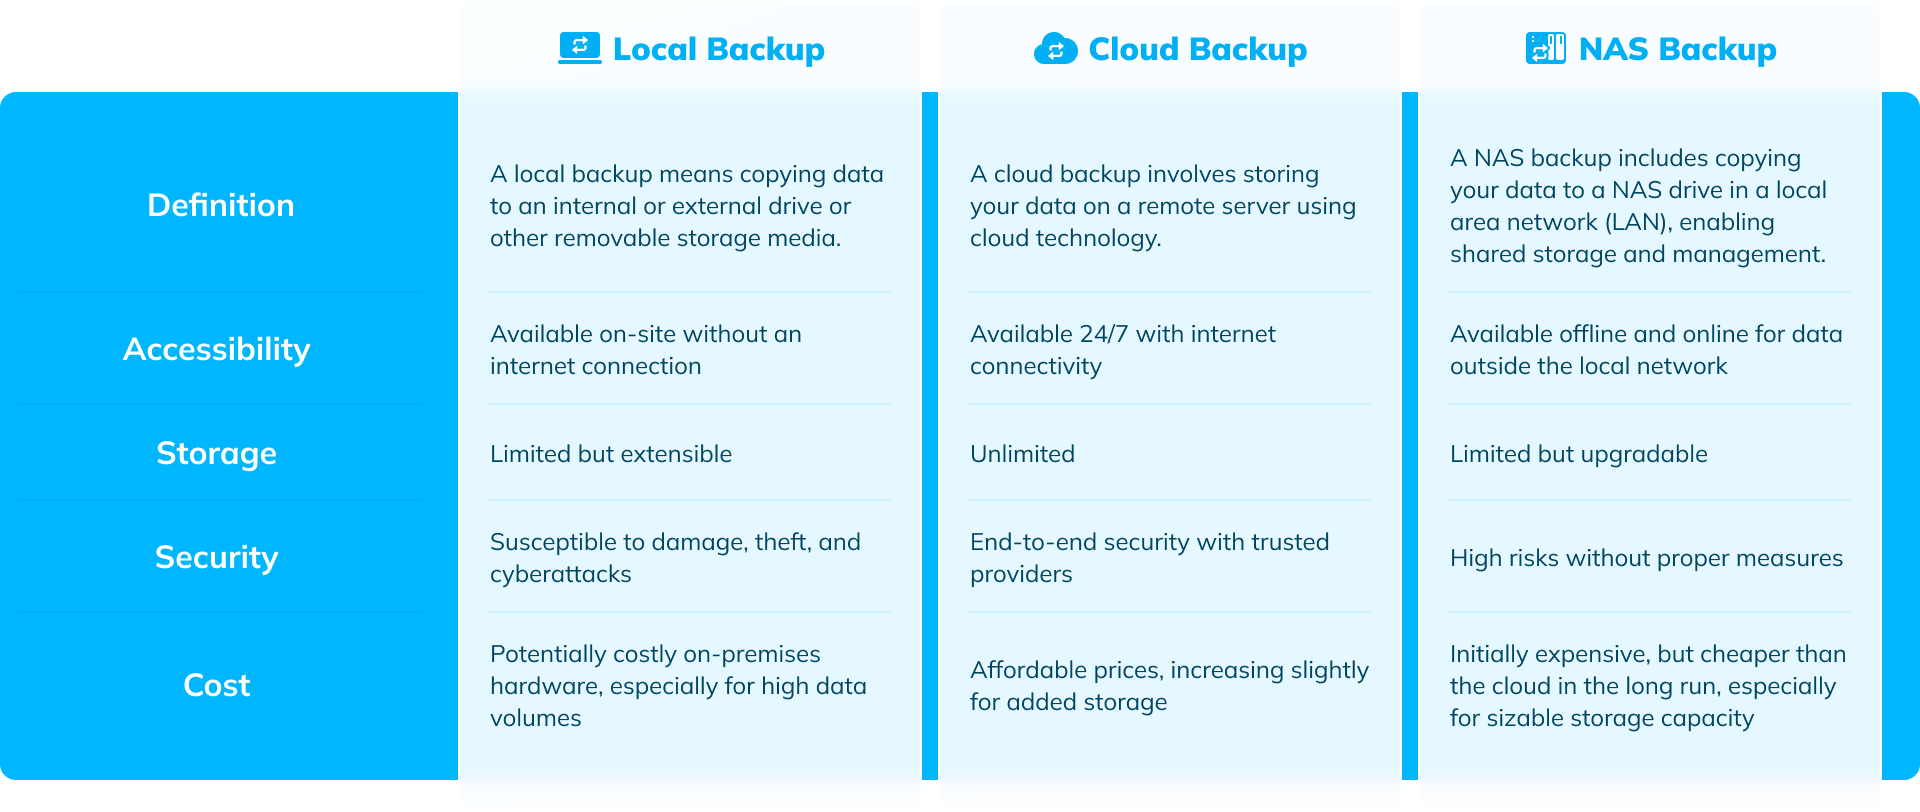 Cloud locale nas backup